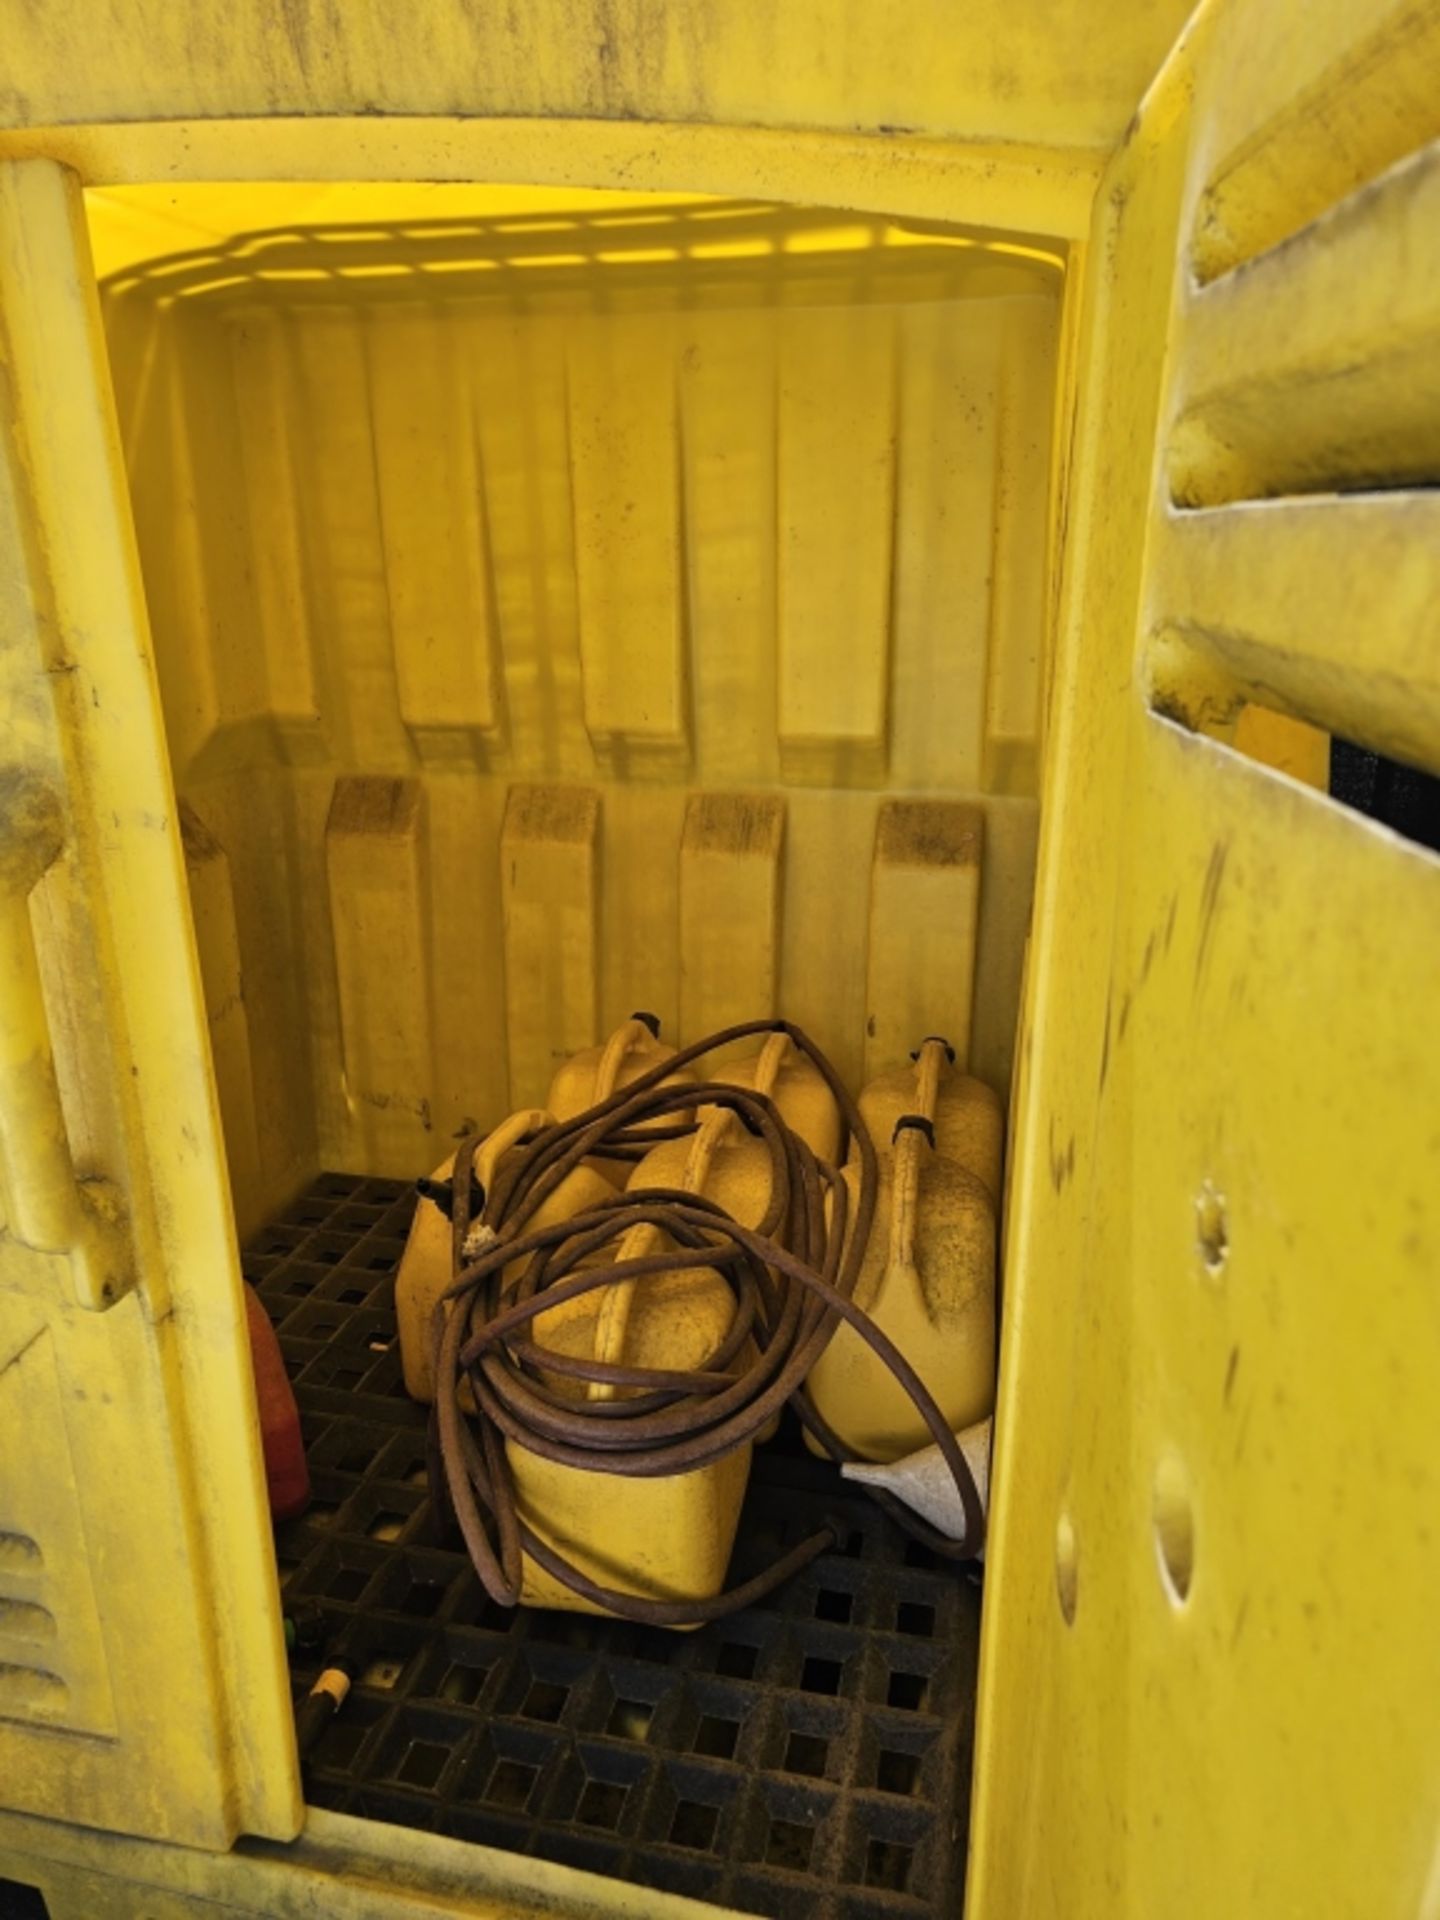 2-Door Portable Chemical Storage Room - Image 2 of 5